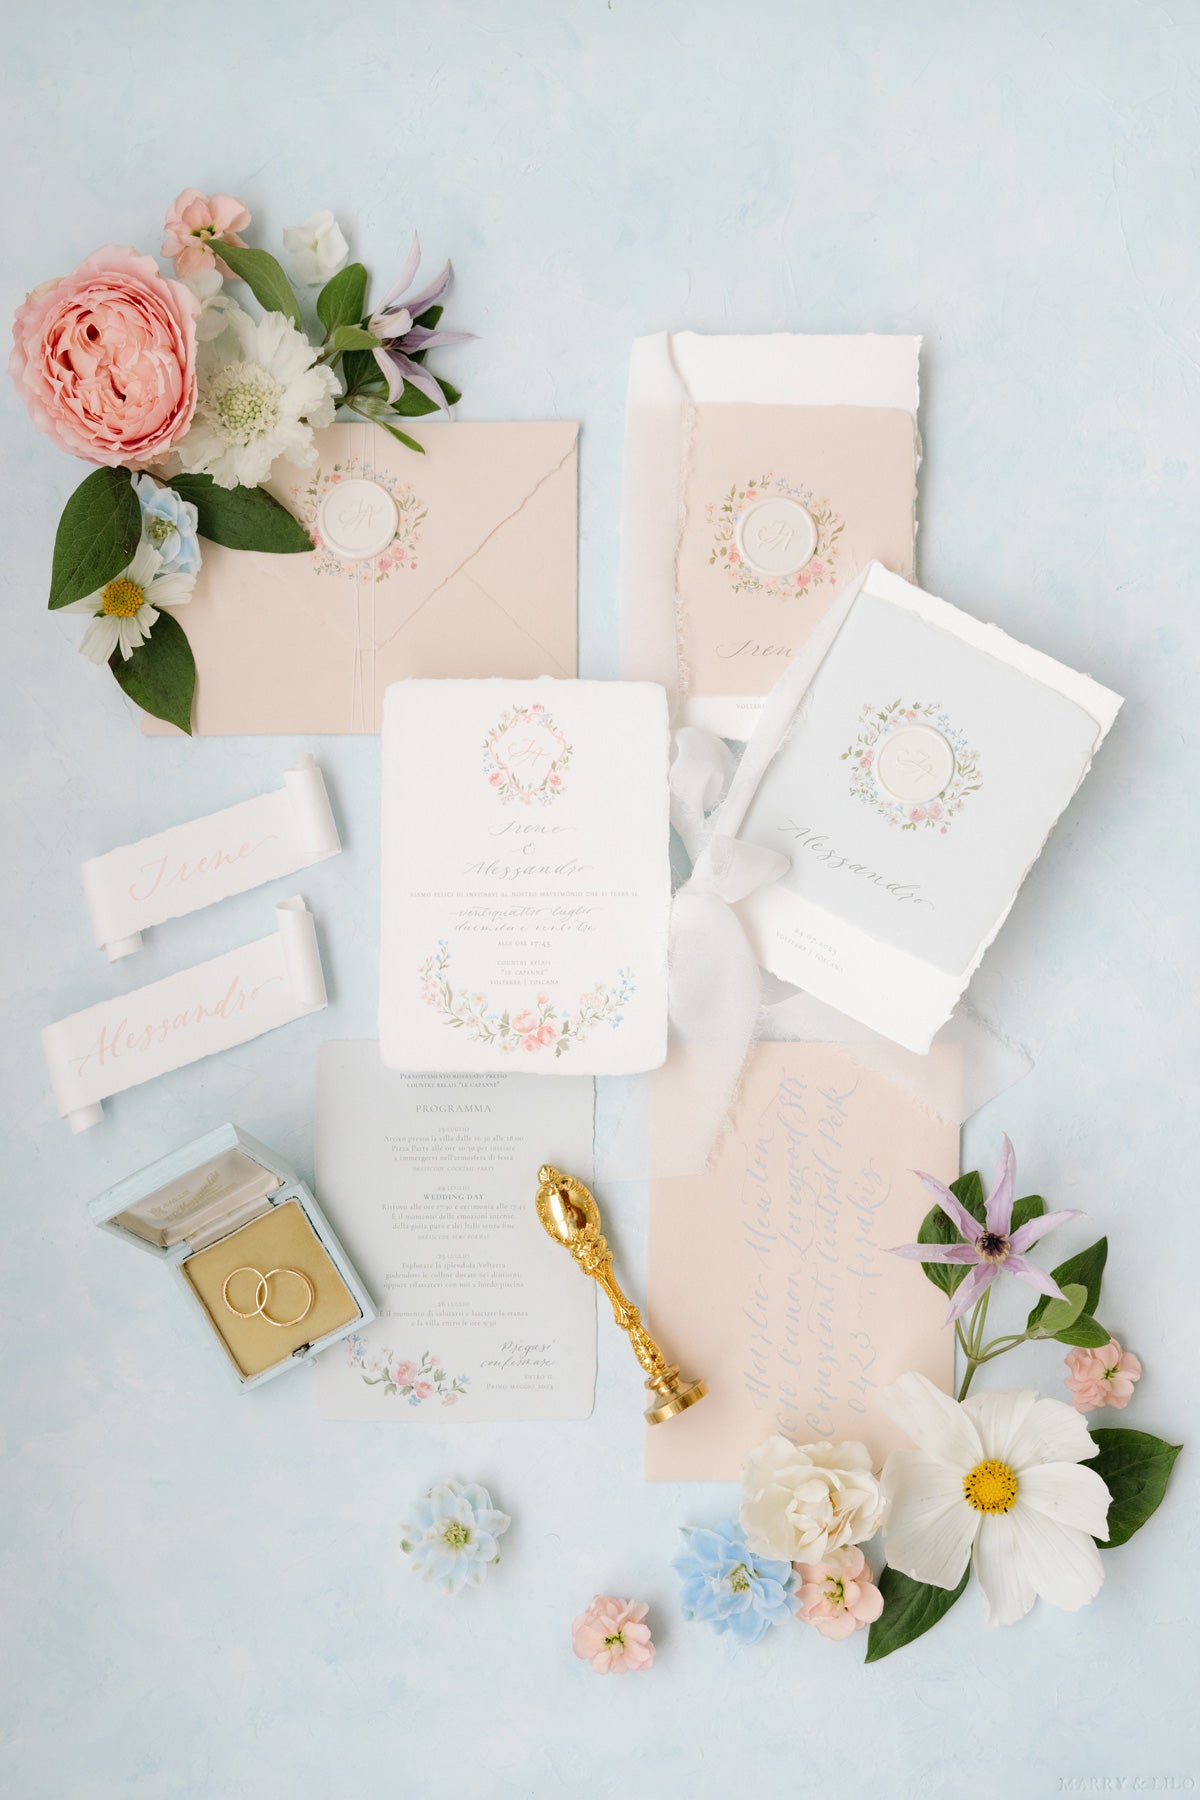 Exquisite wedding invitation suite on textured handmade paper, a testament to timeless elegance